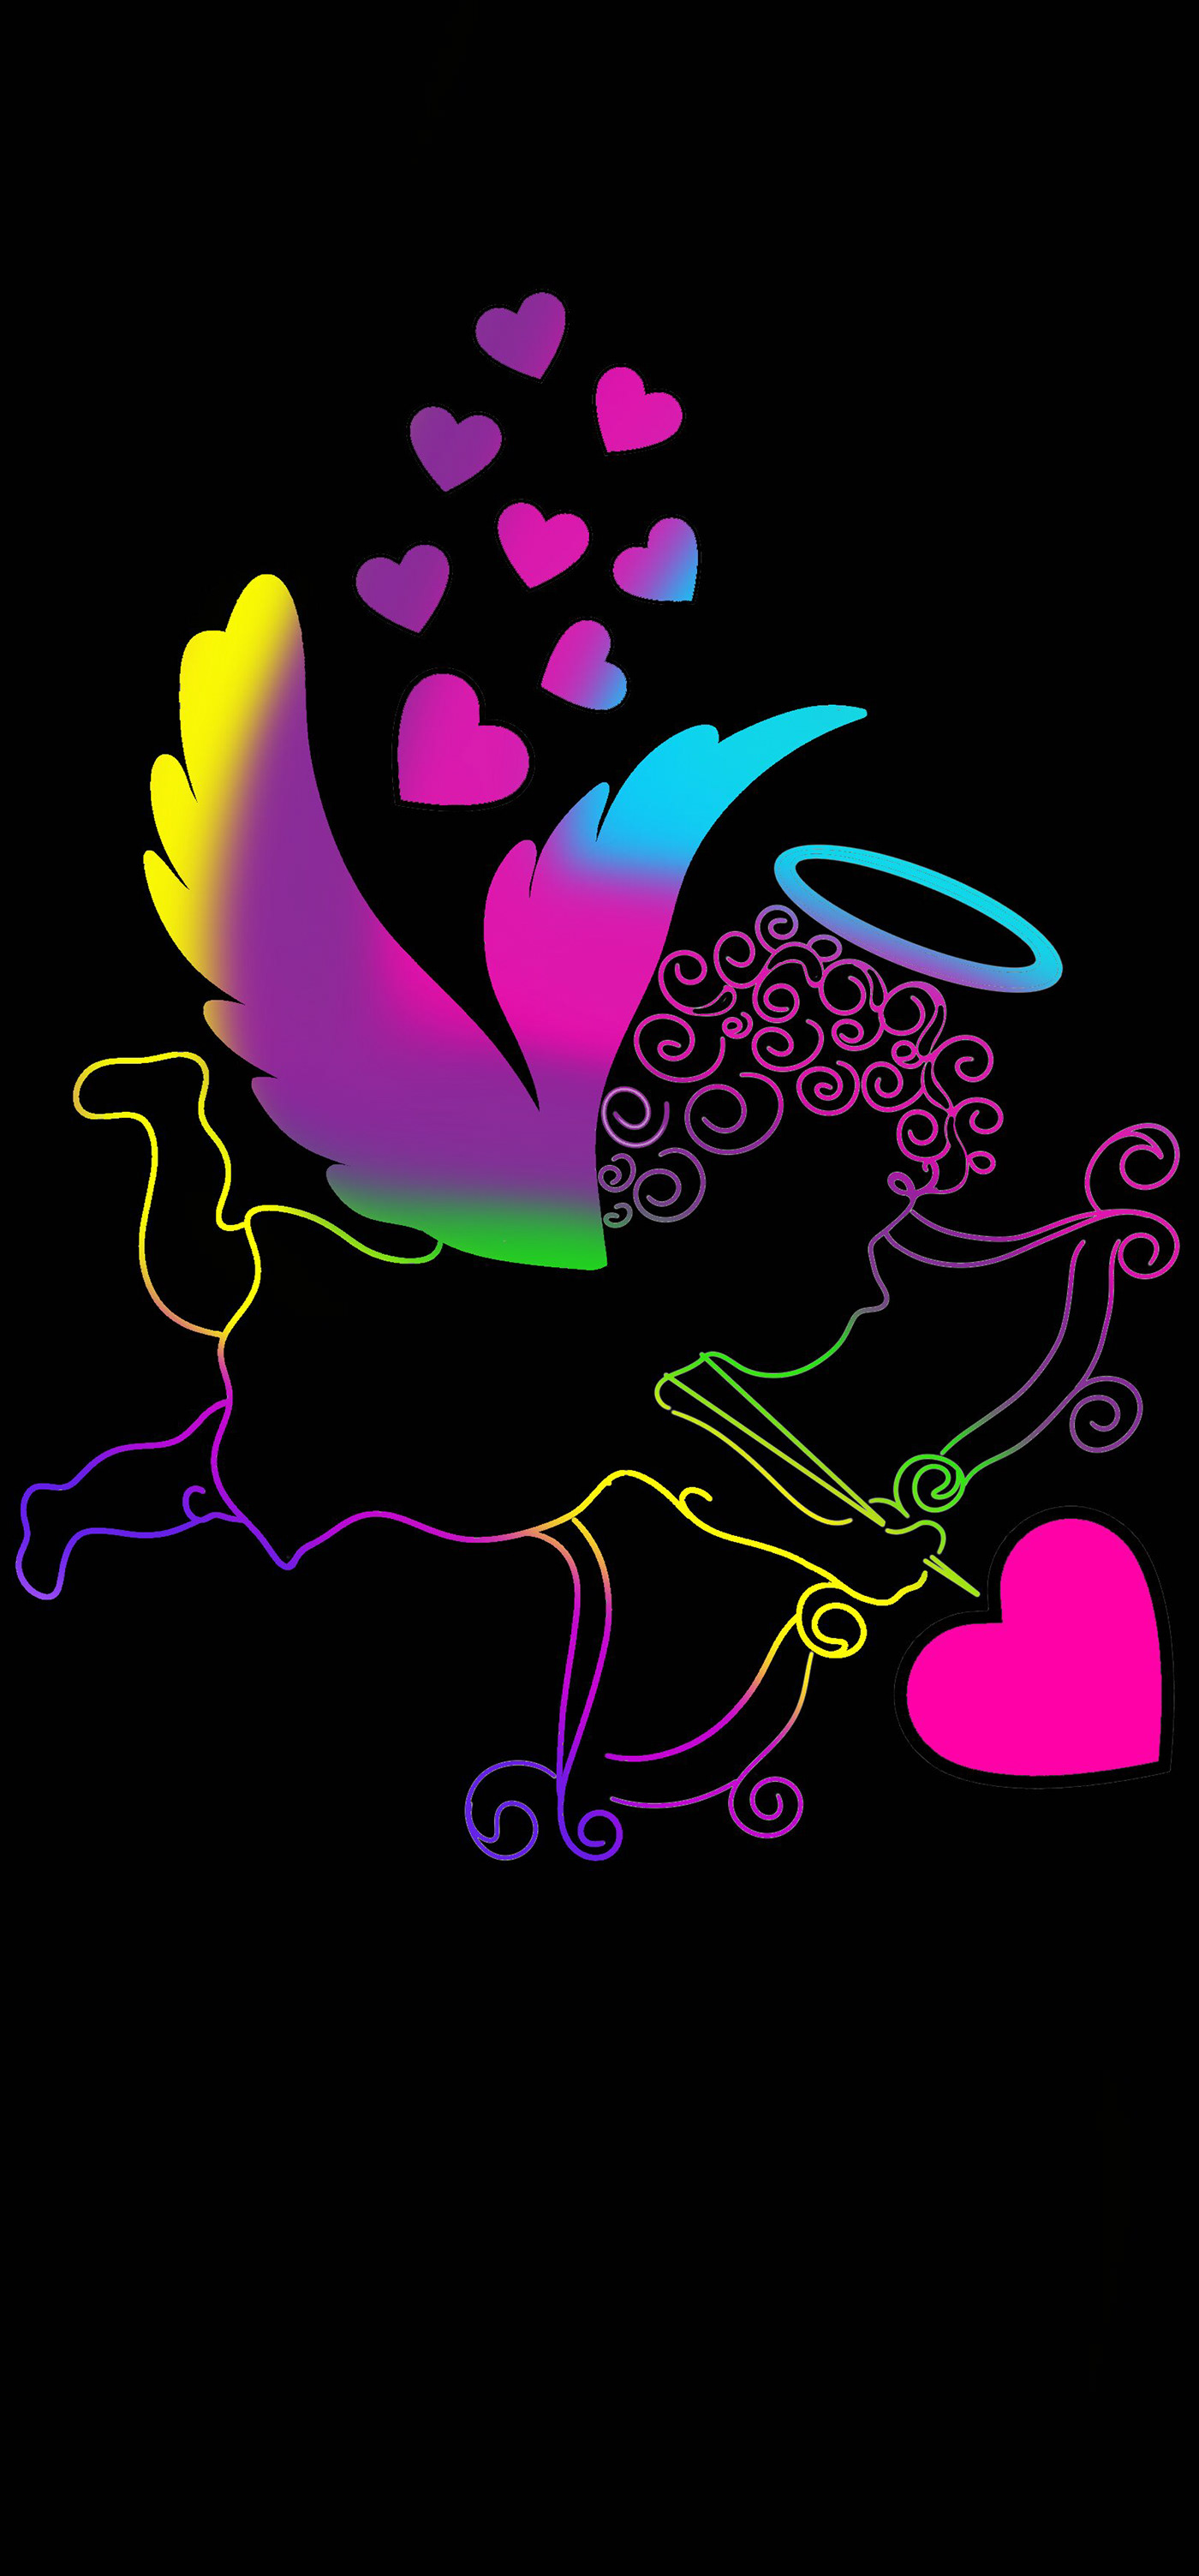 cupid angel Love romance happiness neon colorful Holiday